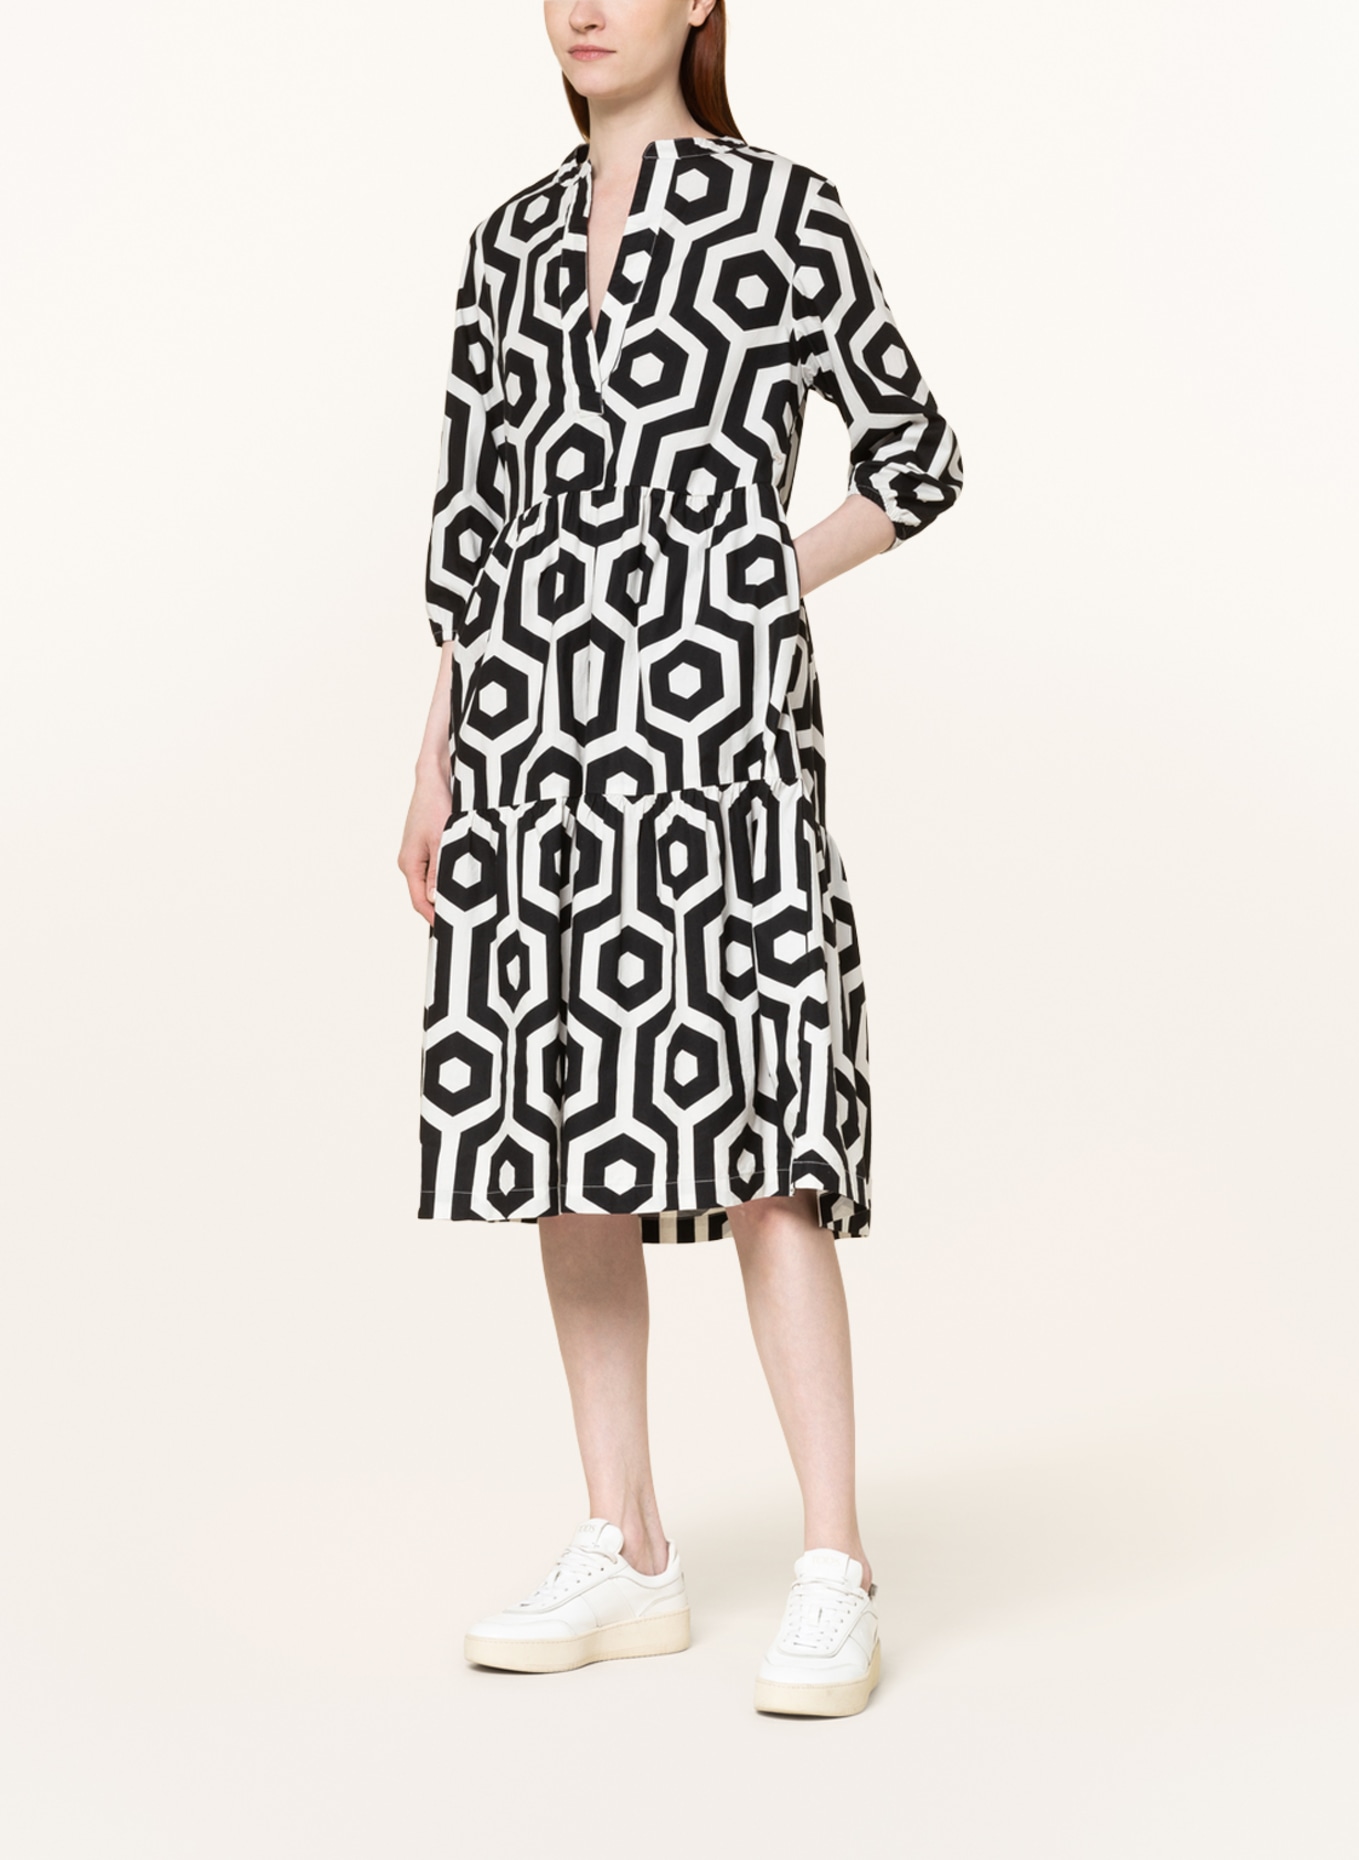 white with FYNCH-HATTON Dress black/ in sleeves 3/4